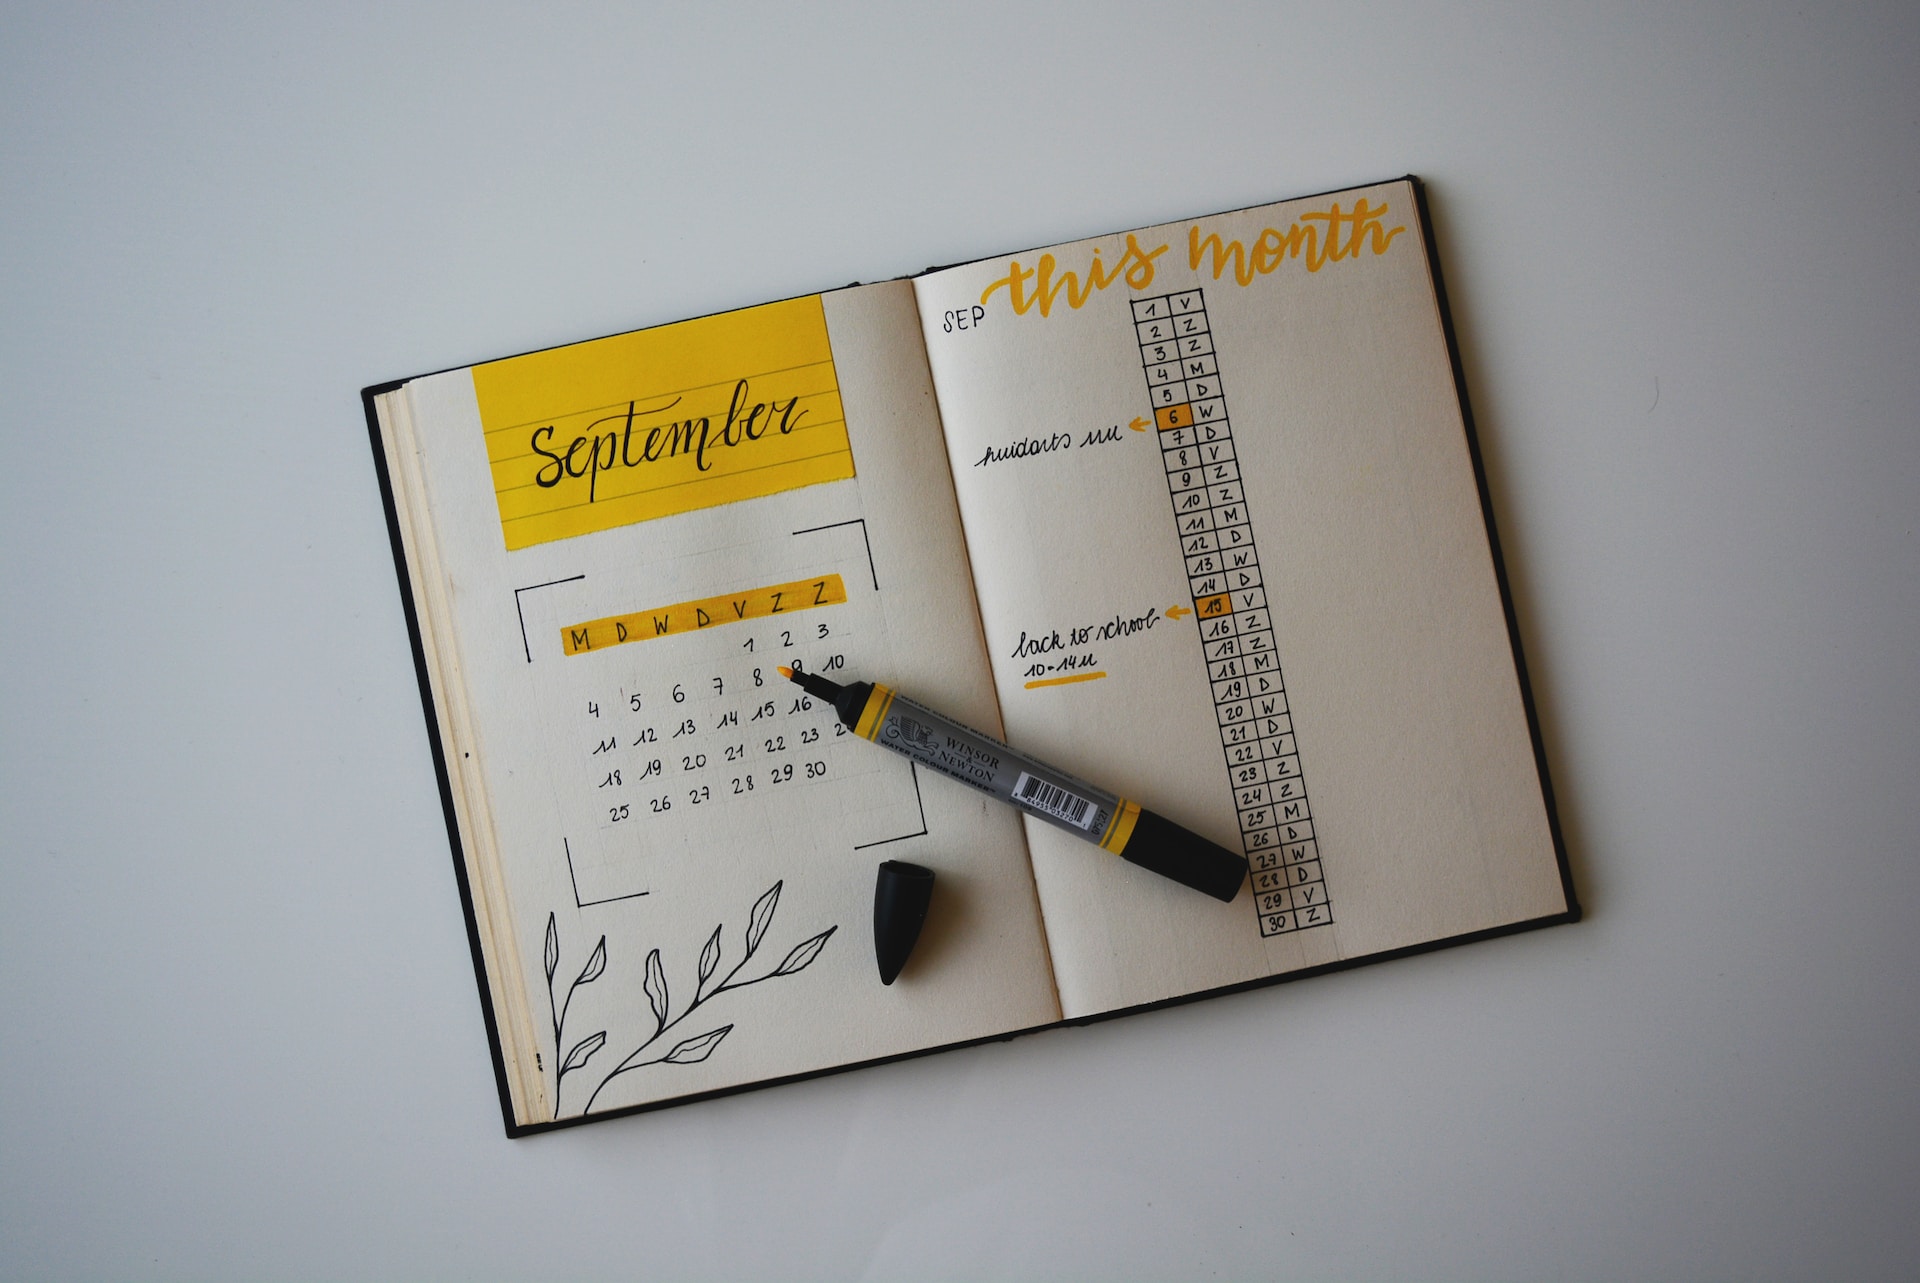 A notebook for noting down inspection dates.